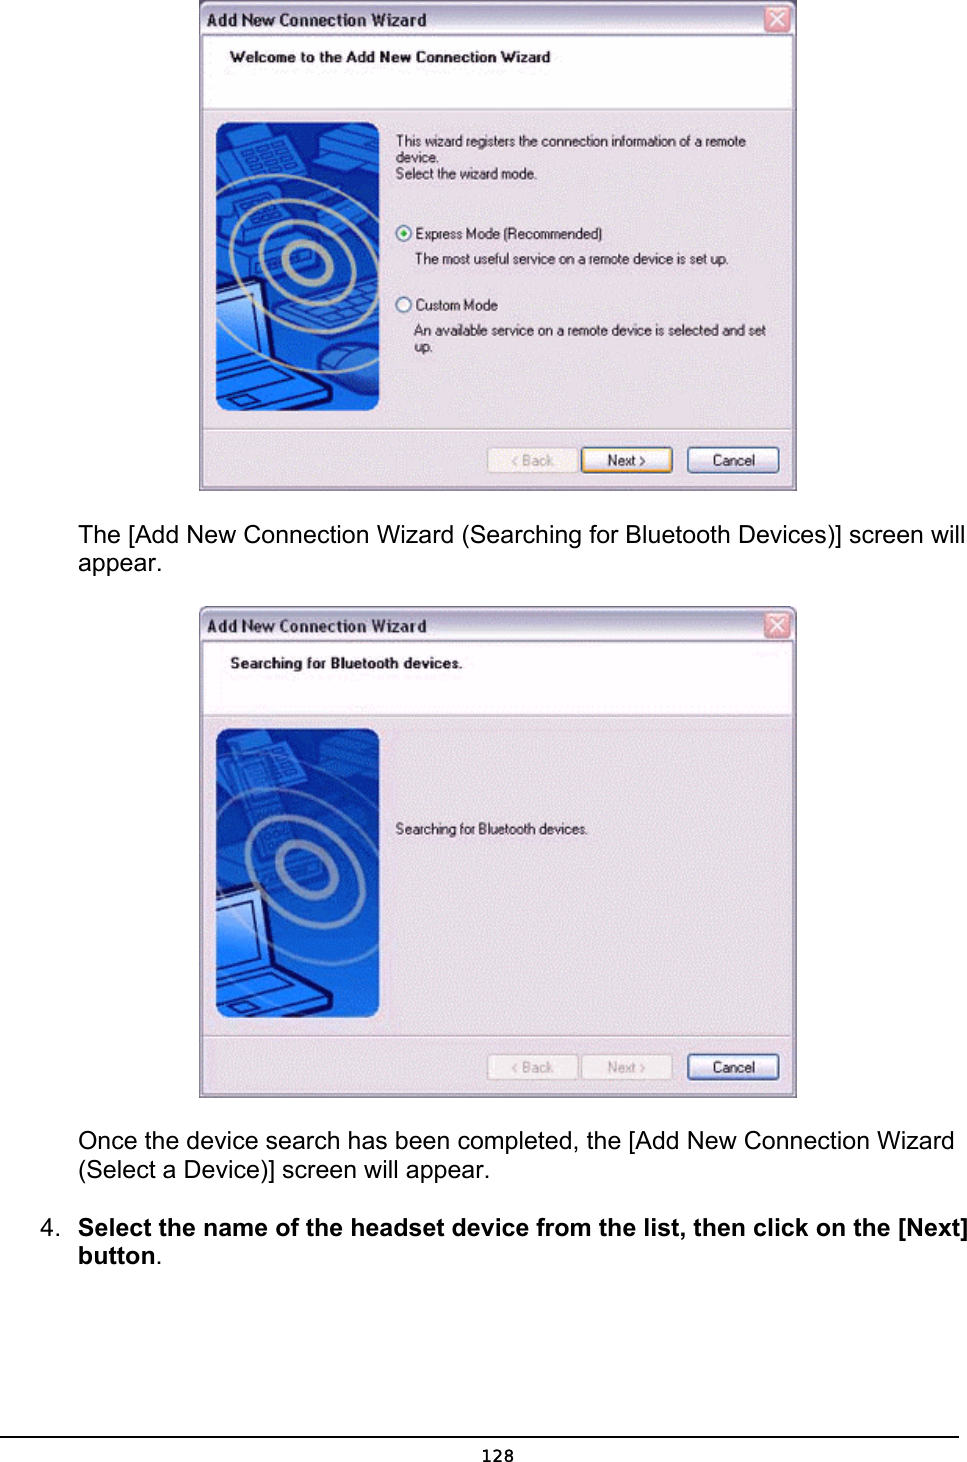         The [Add New Connection Wizard (Searching for Bluetooth Devices)] screen will    appear.        Once the device search has been completed, the [Add New Connection Wizard       (Select a Device)] screen will appear. 4.  Select the name of the headset device from the list, then click on the [Next] button.  128